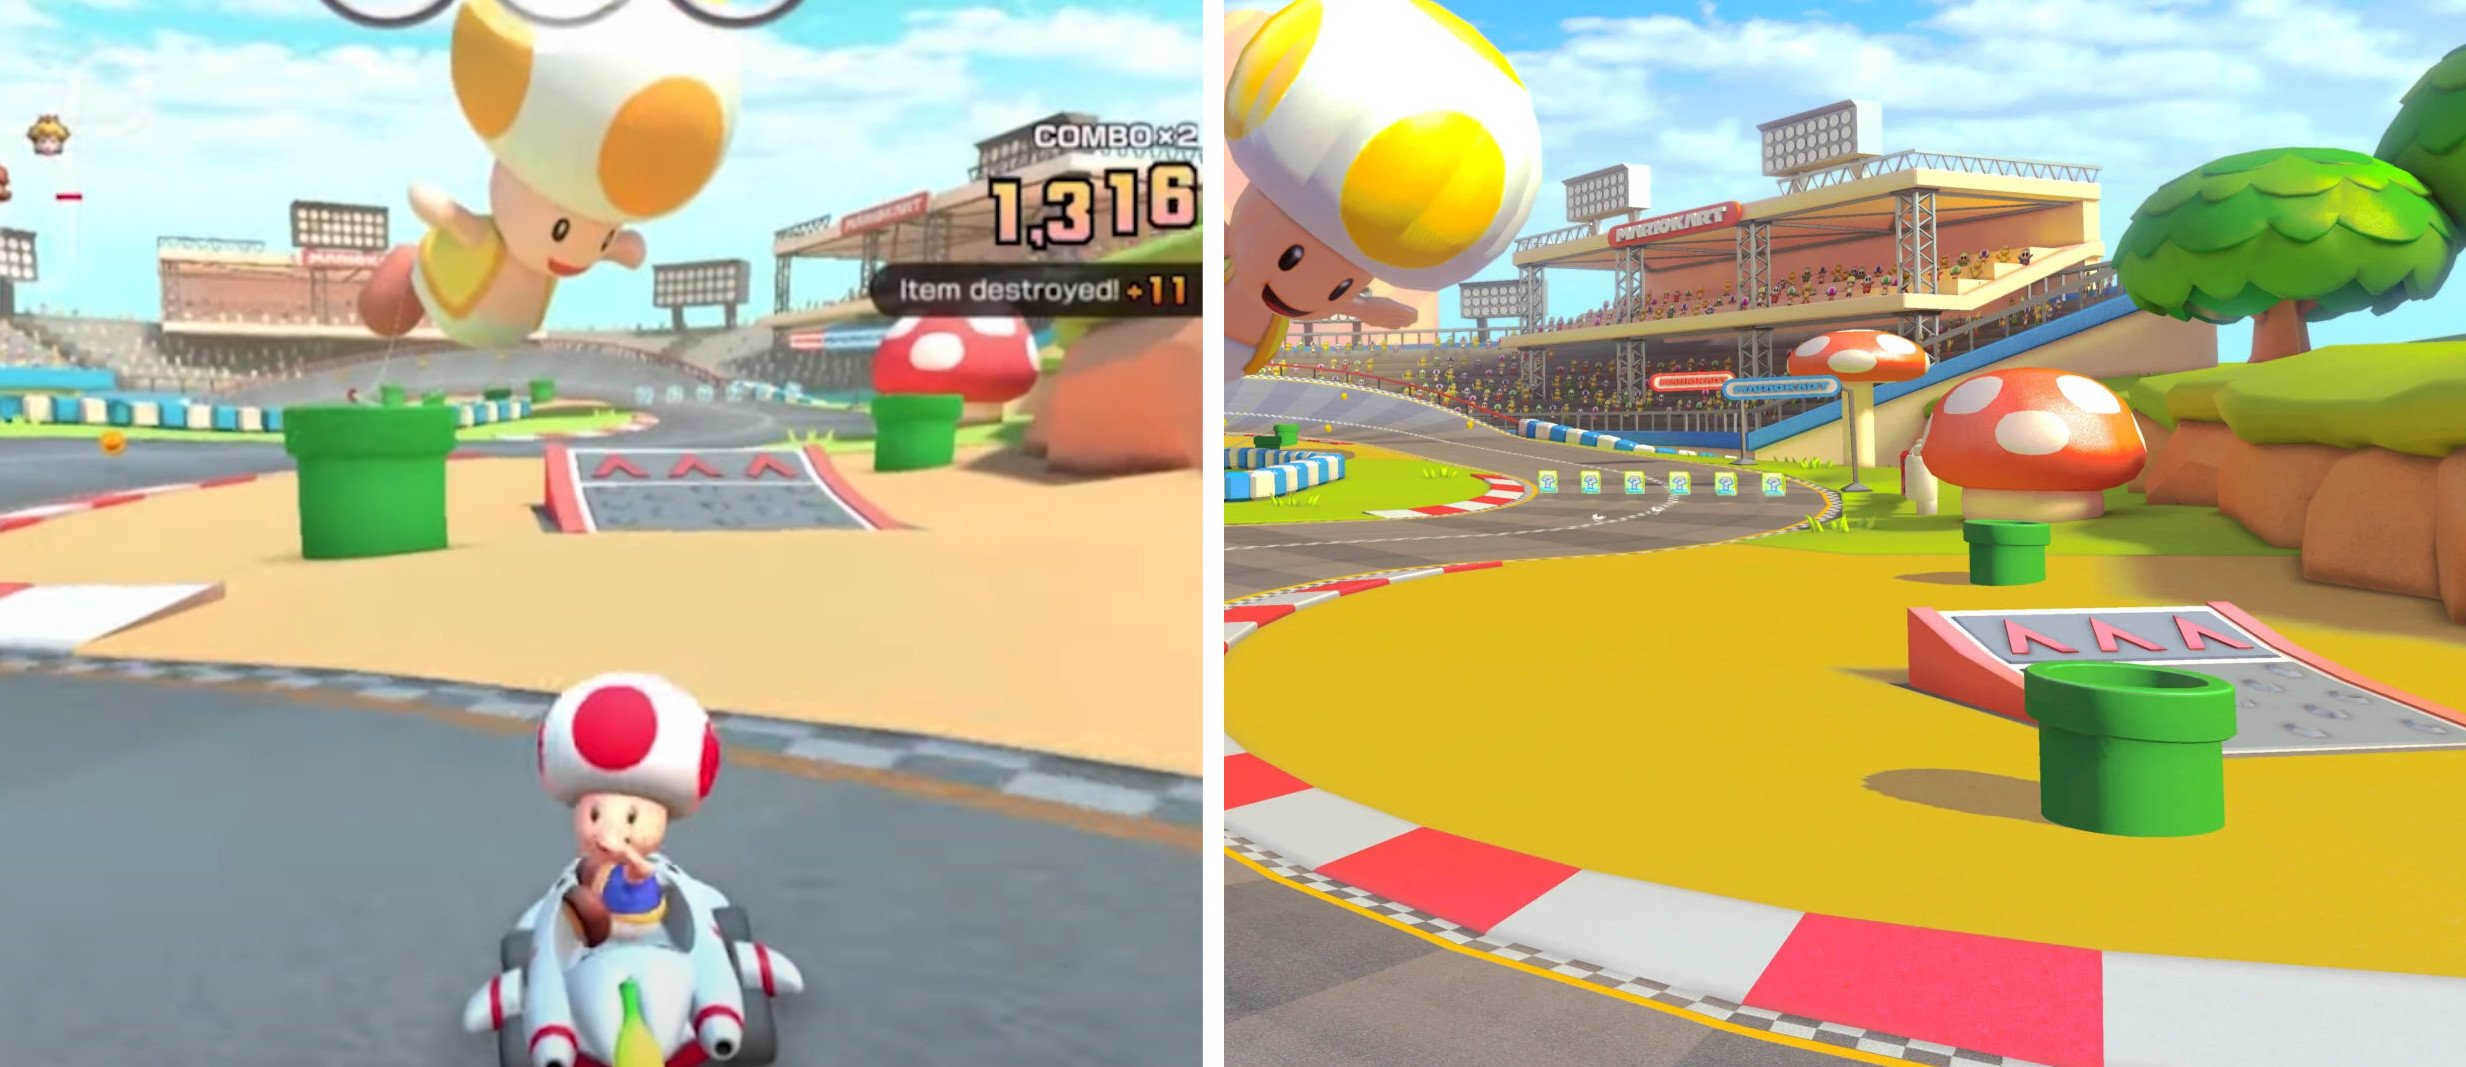 It looks like Mario Kart 8 Deluxe's DLC tracks could be coming